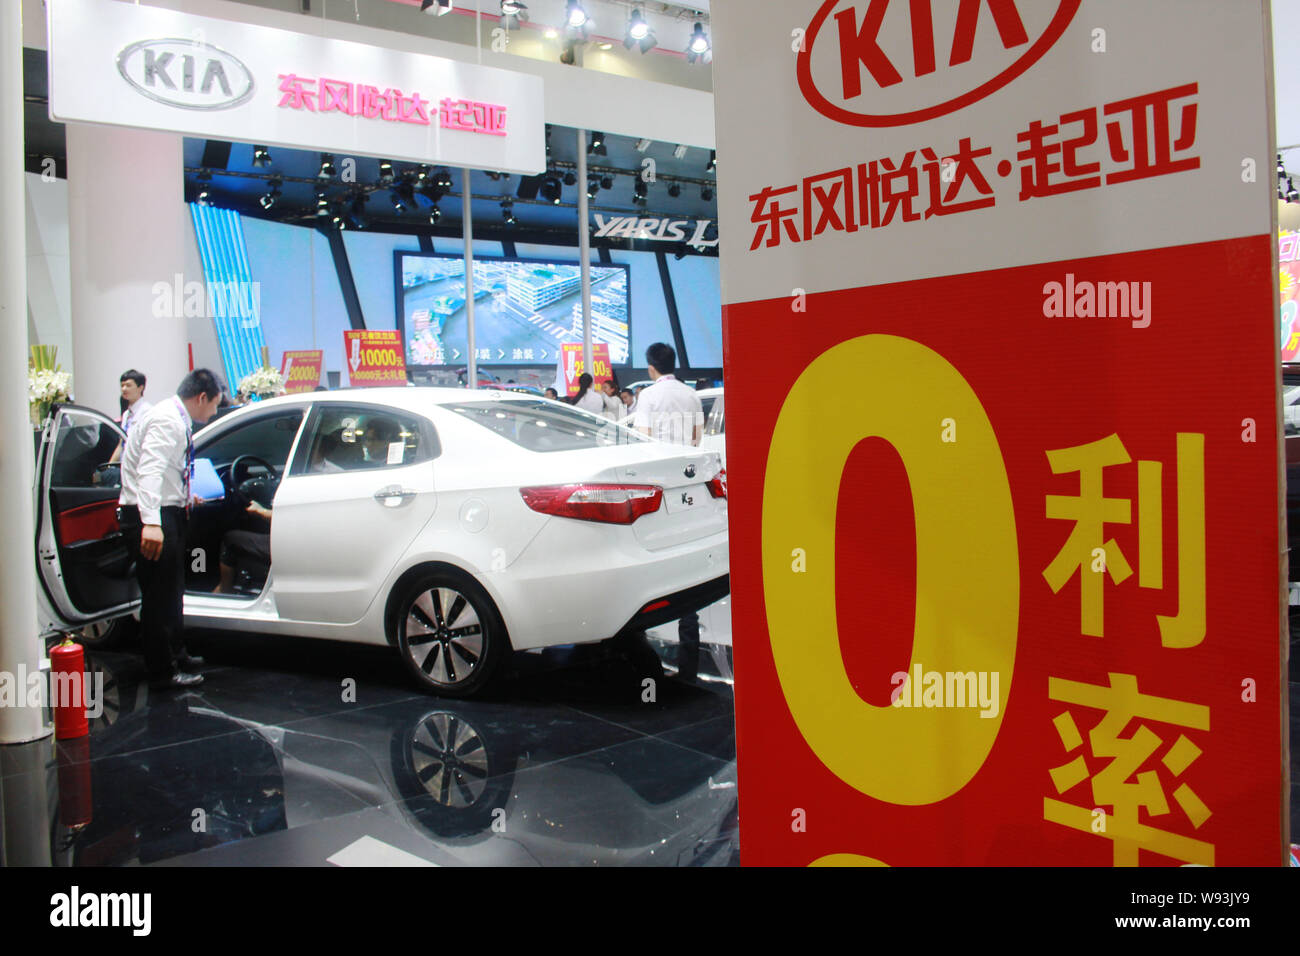 Visitors try out a Kia car during an automobile exhibition in Haikou, south Chinas Hainan province, 7 September 2013.   Chinas auto sales accelerated Stock Photo